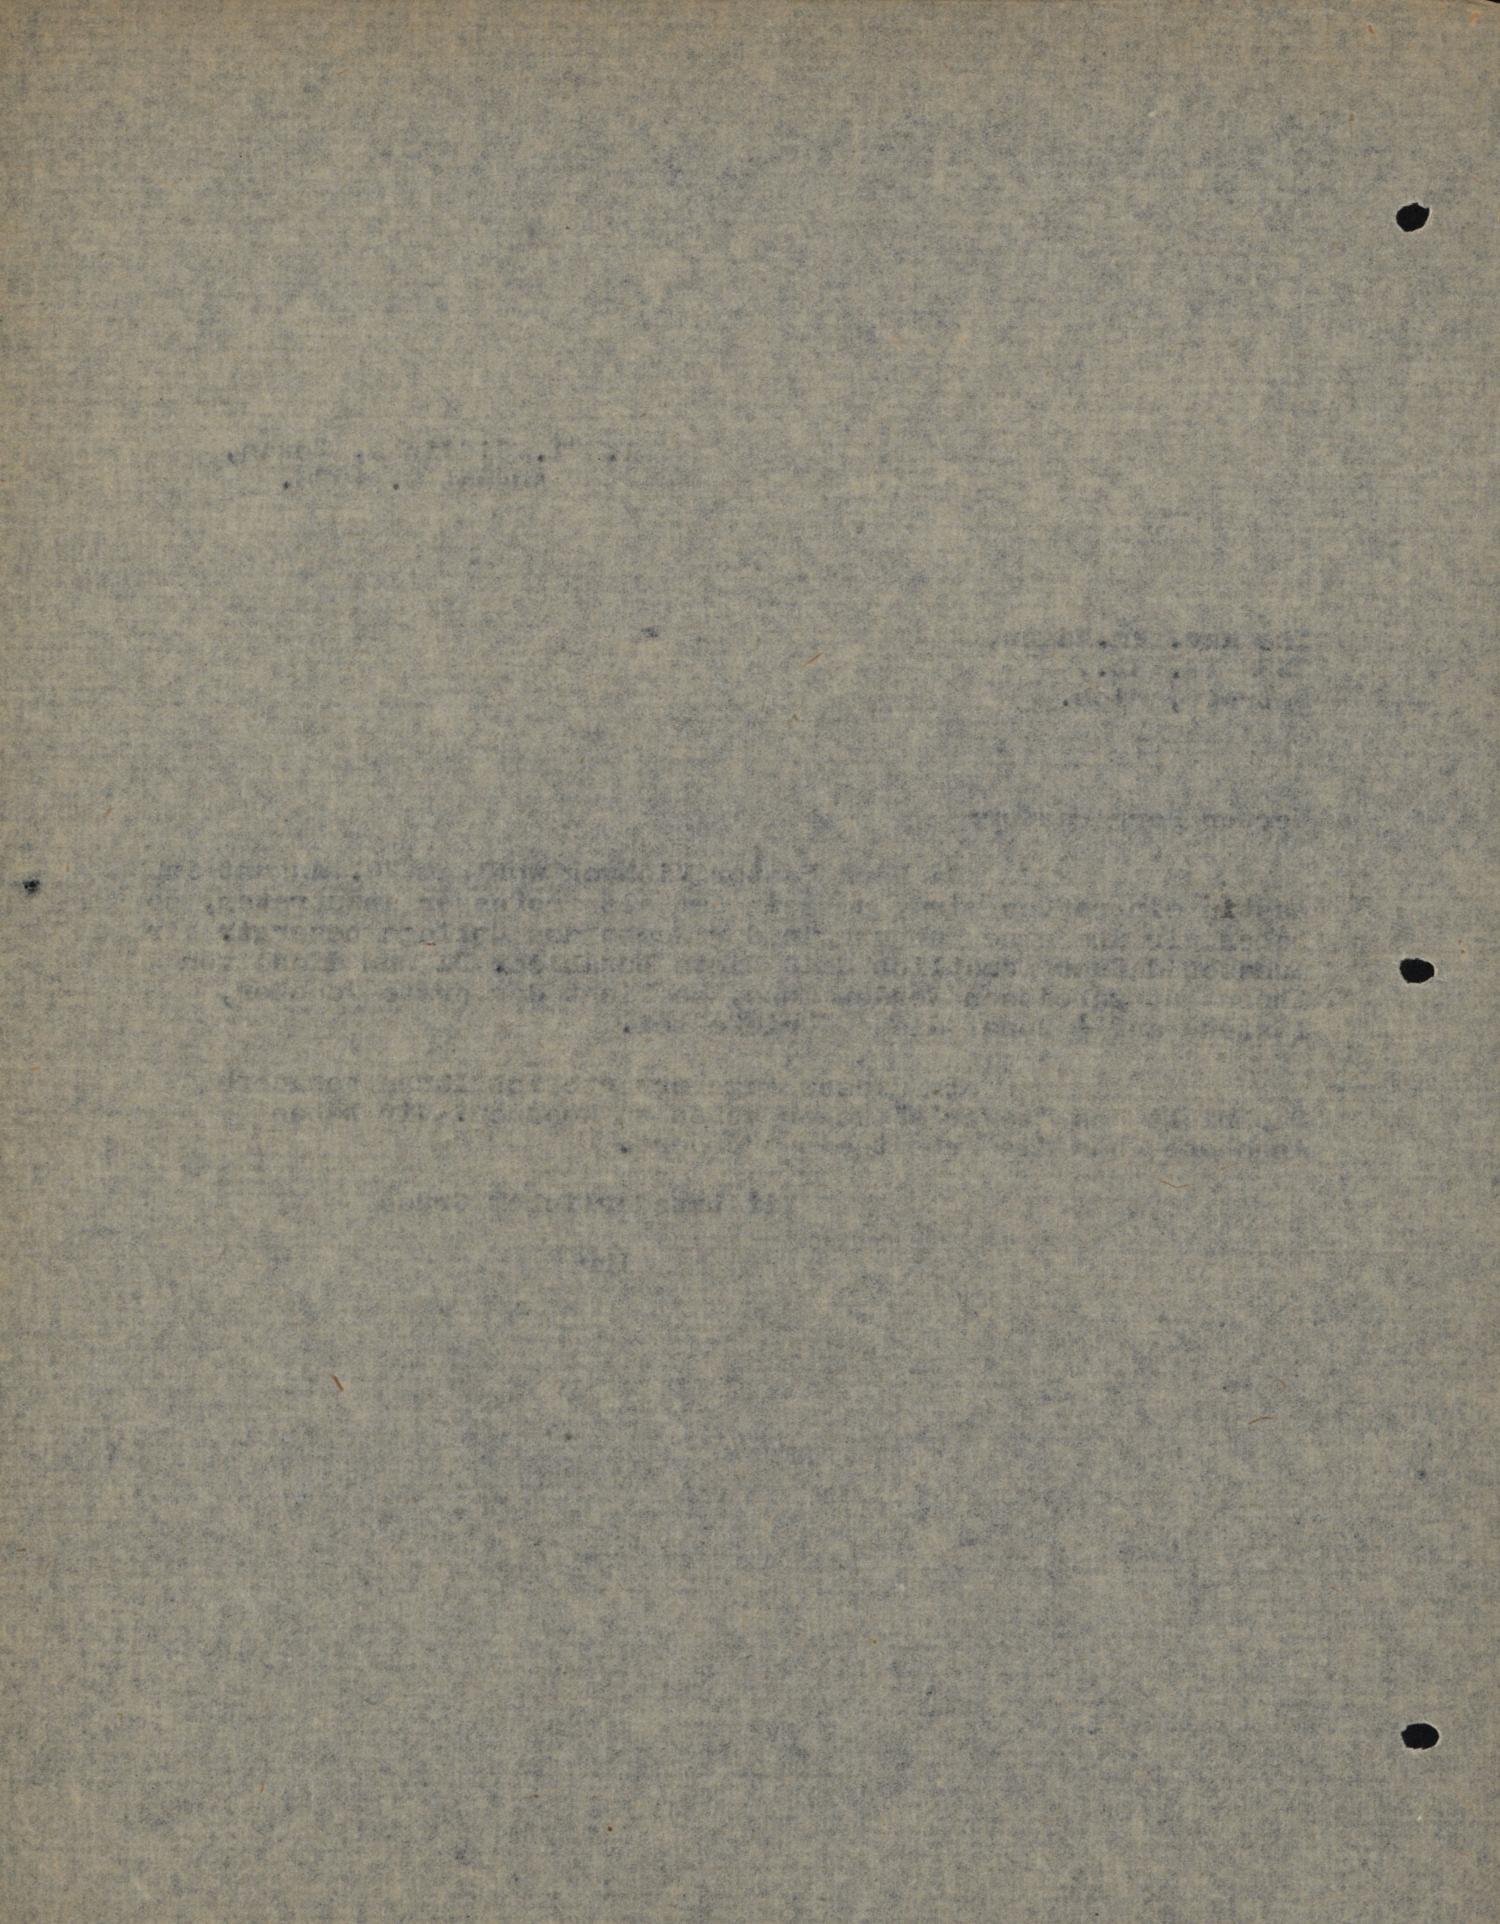 [Letter from Concordia College Board of Control to William Hagen, August 8, 1928]
                                                
                                                    [Sequence #]: 2 of 2
                                                